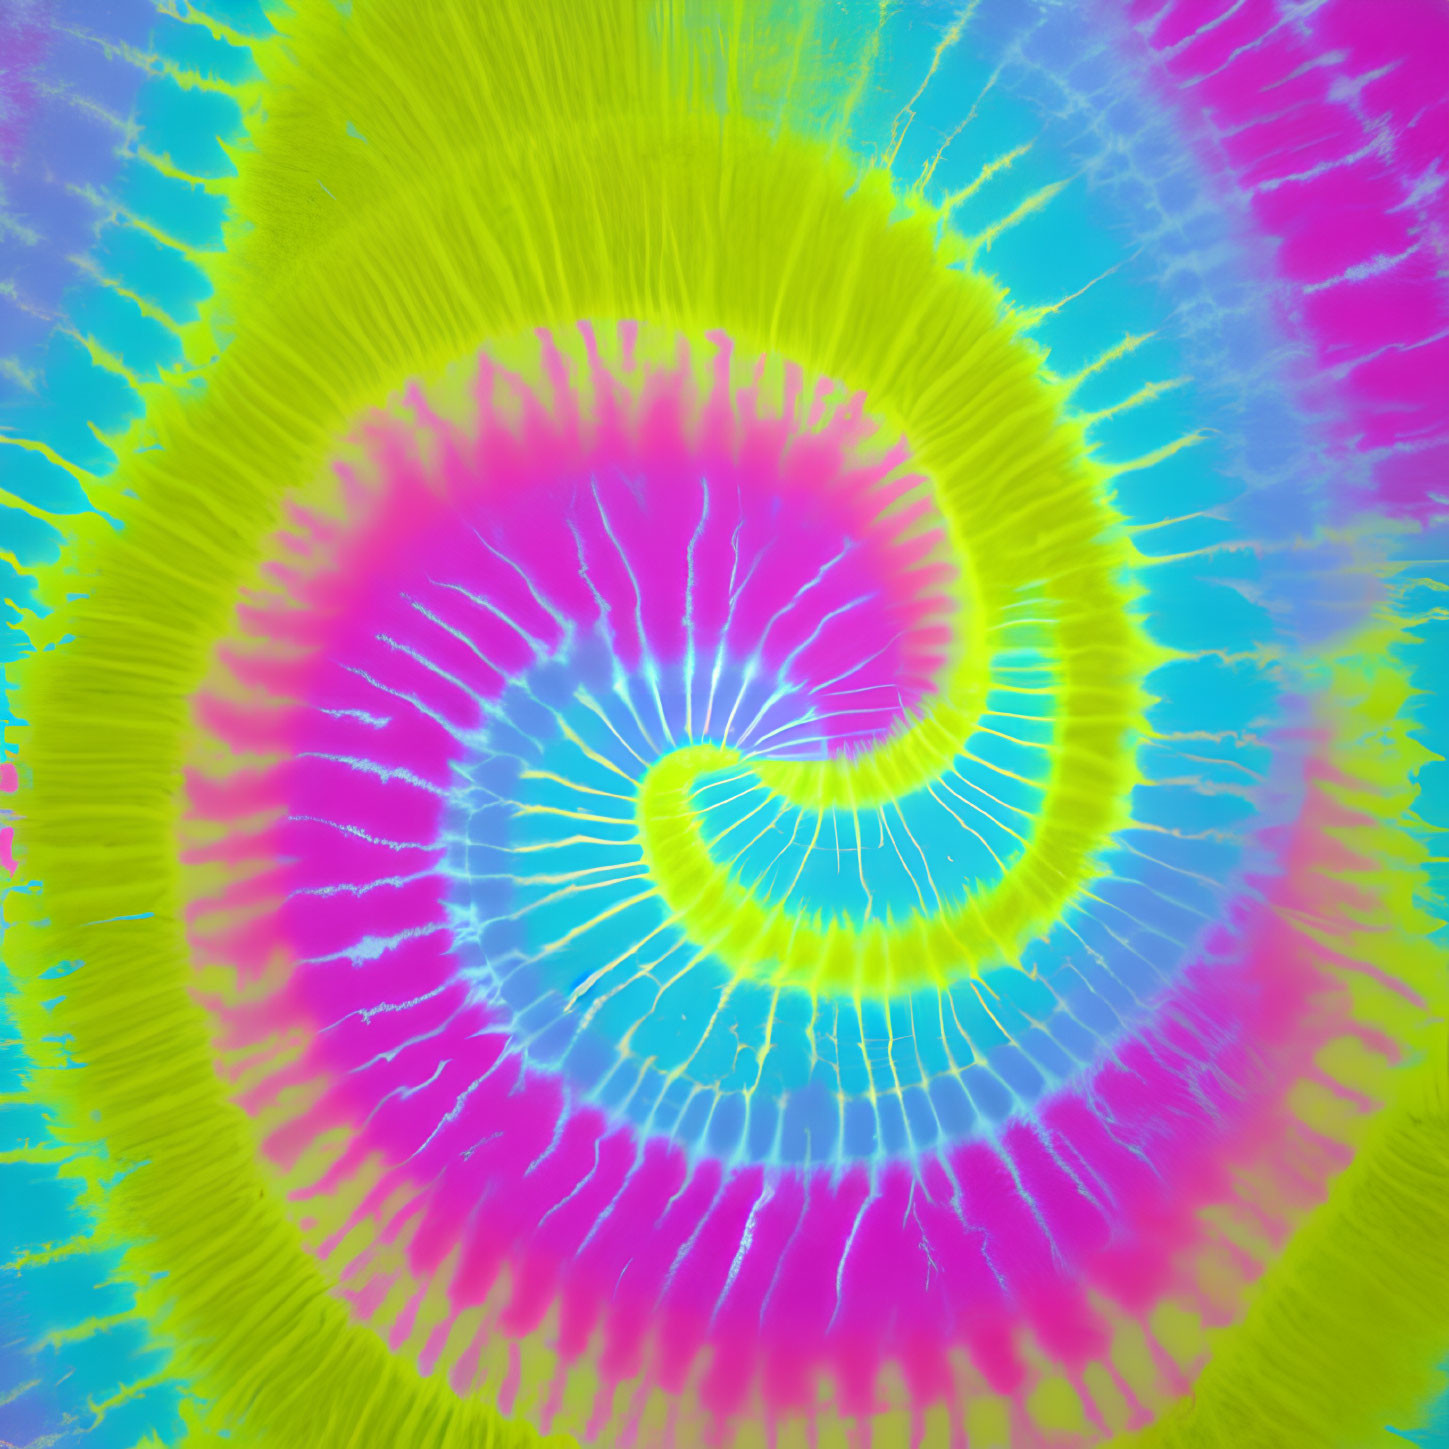 Colorful Spiral Tie-Dye Pattern in Yellow, Green, Blue, and Pink